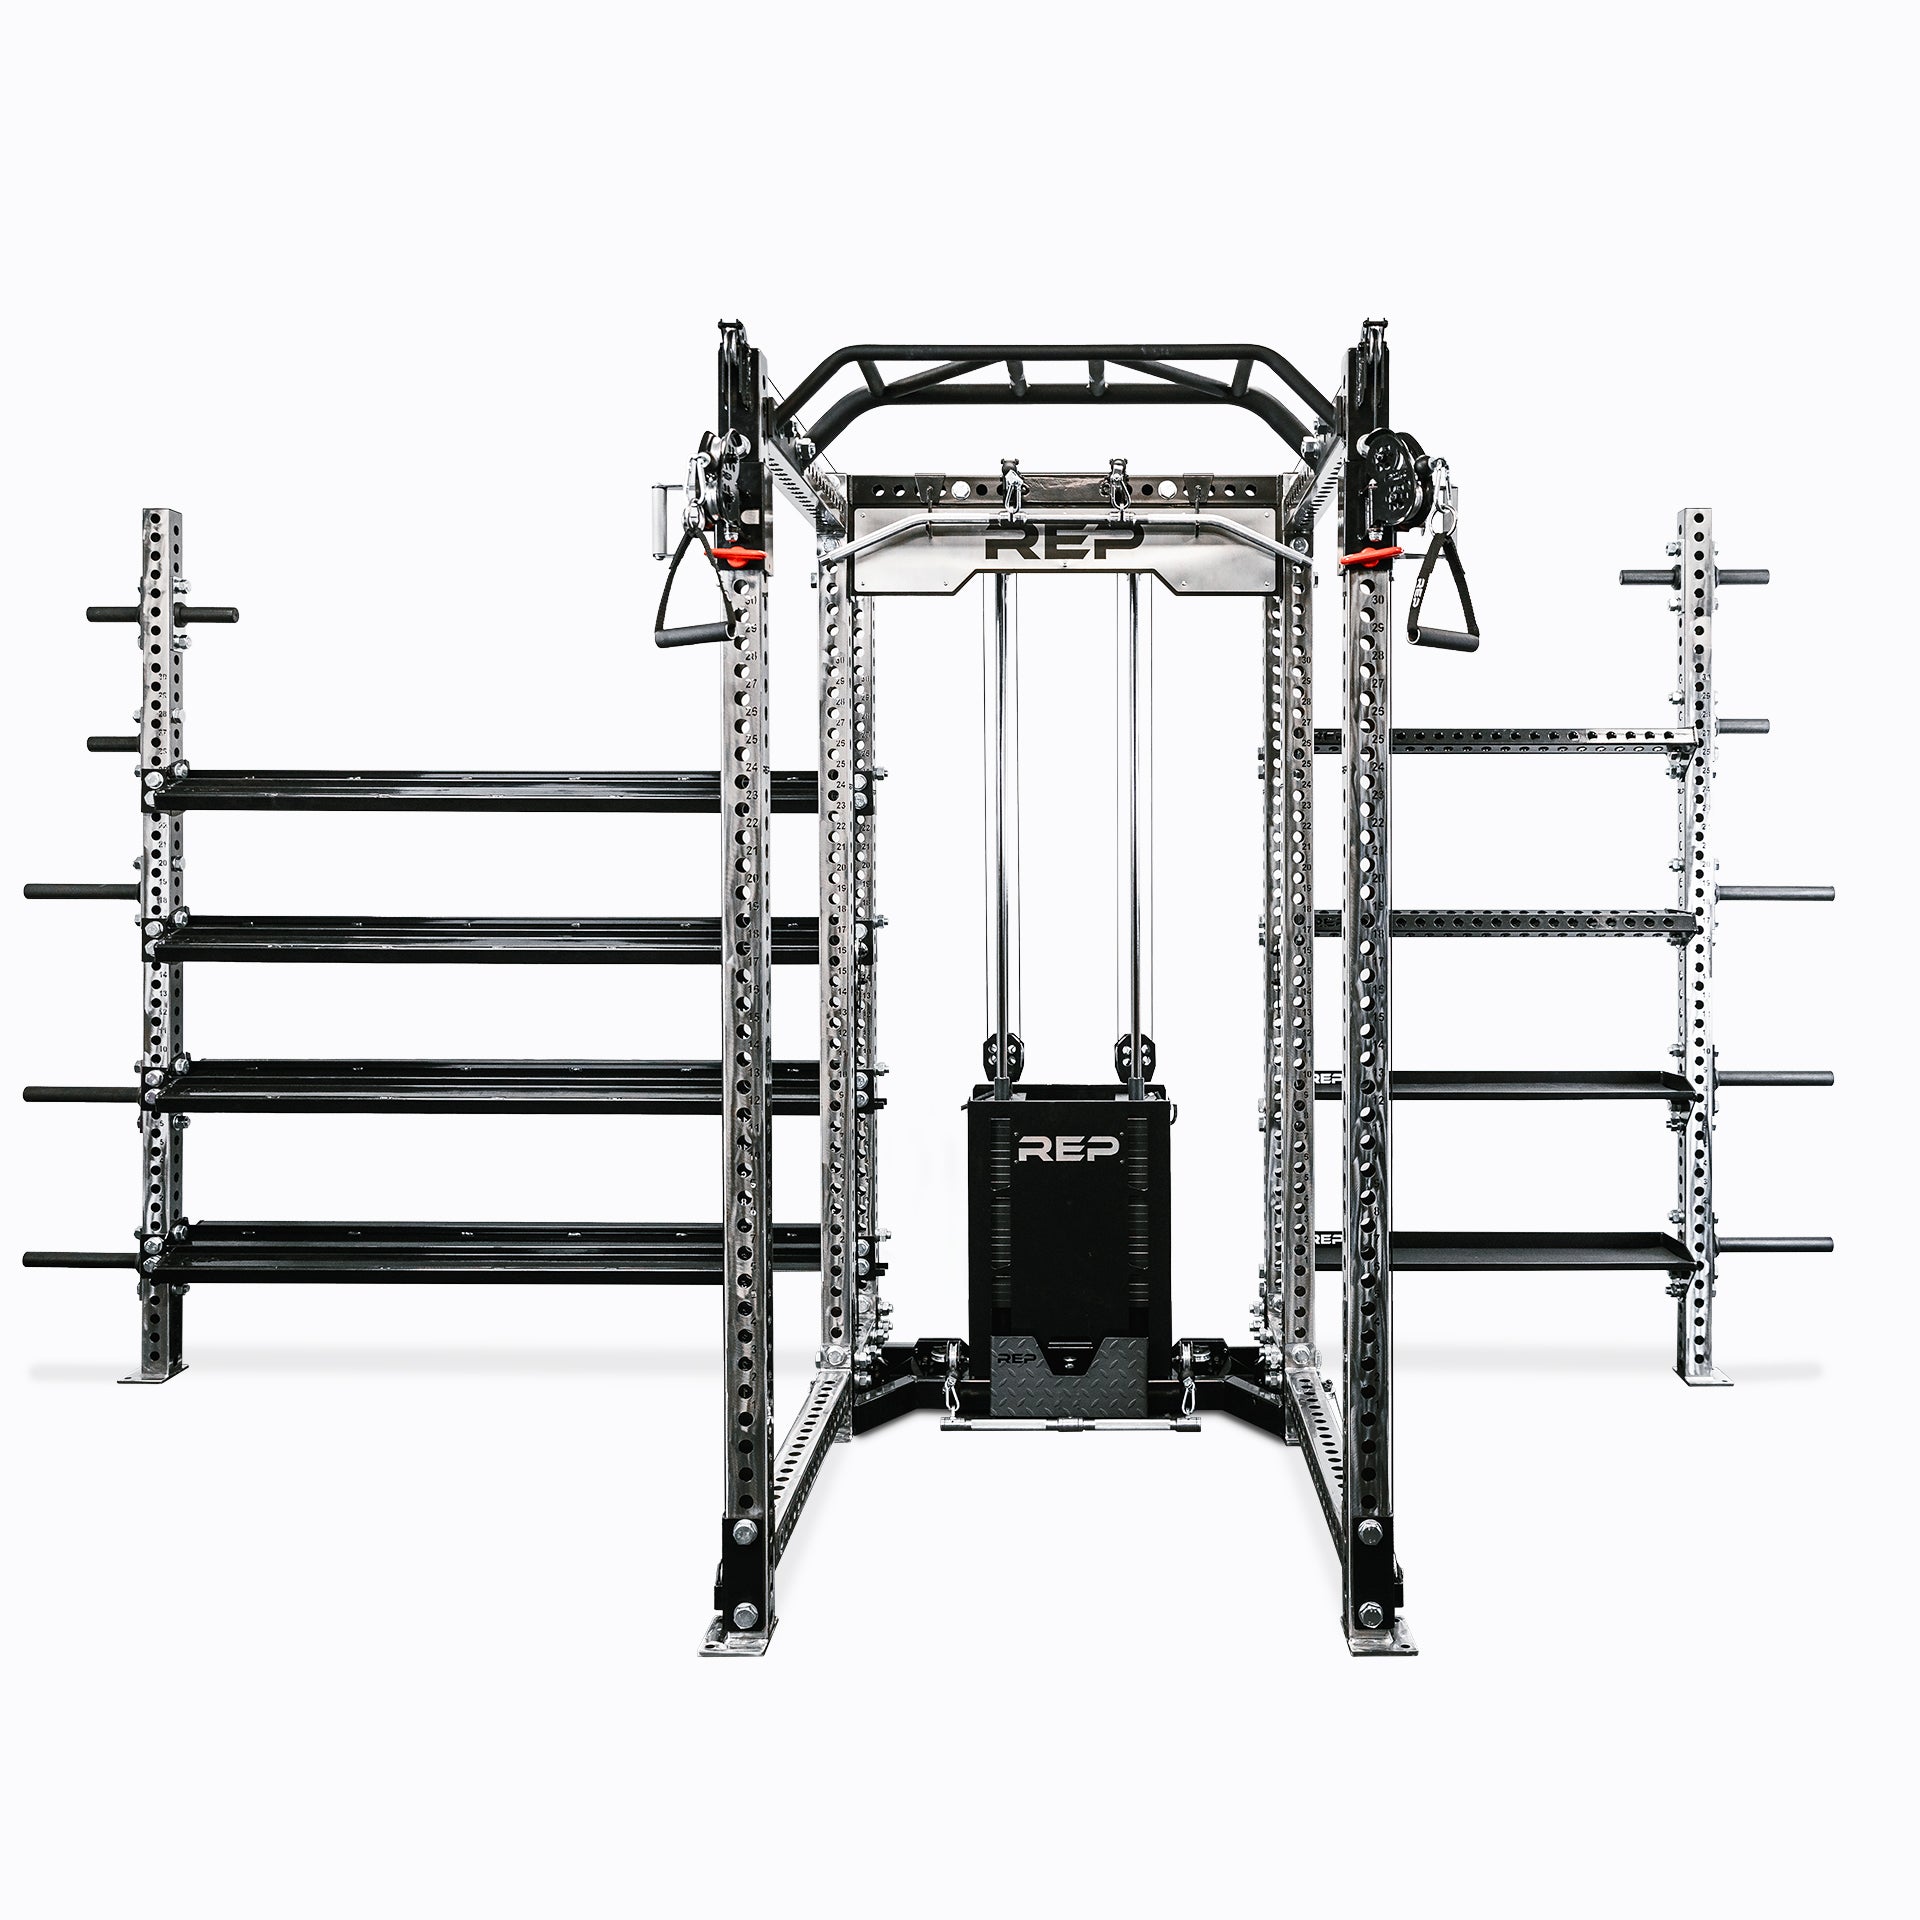 Repxnx - New Products | REP Fitness | Home Gym Equipment